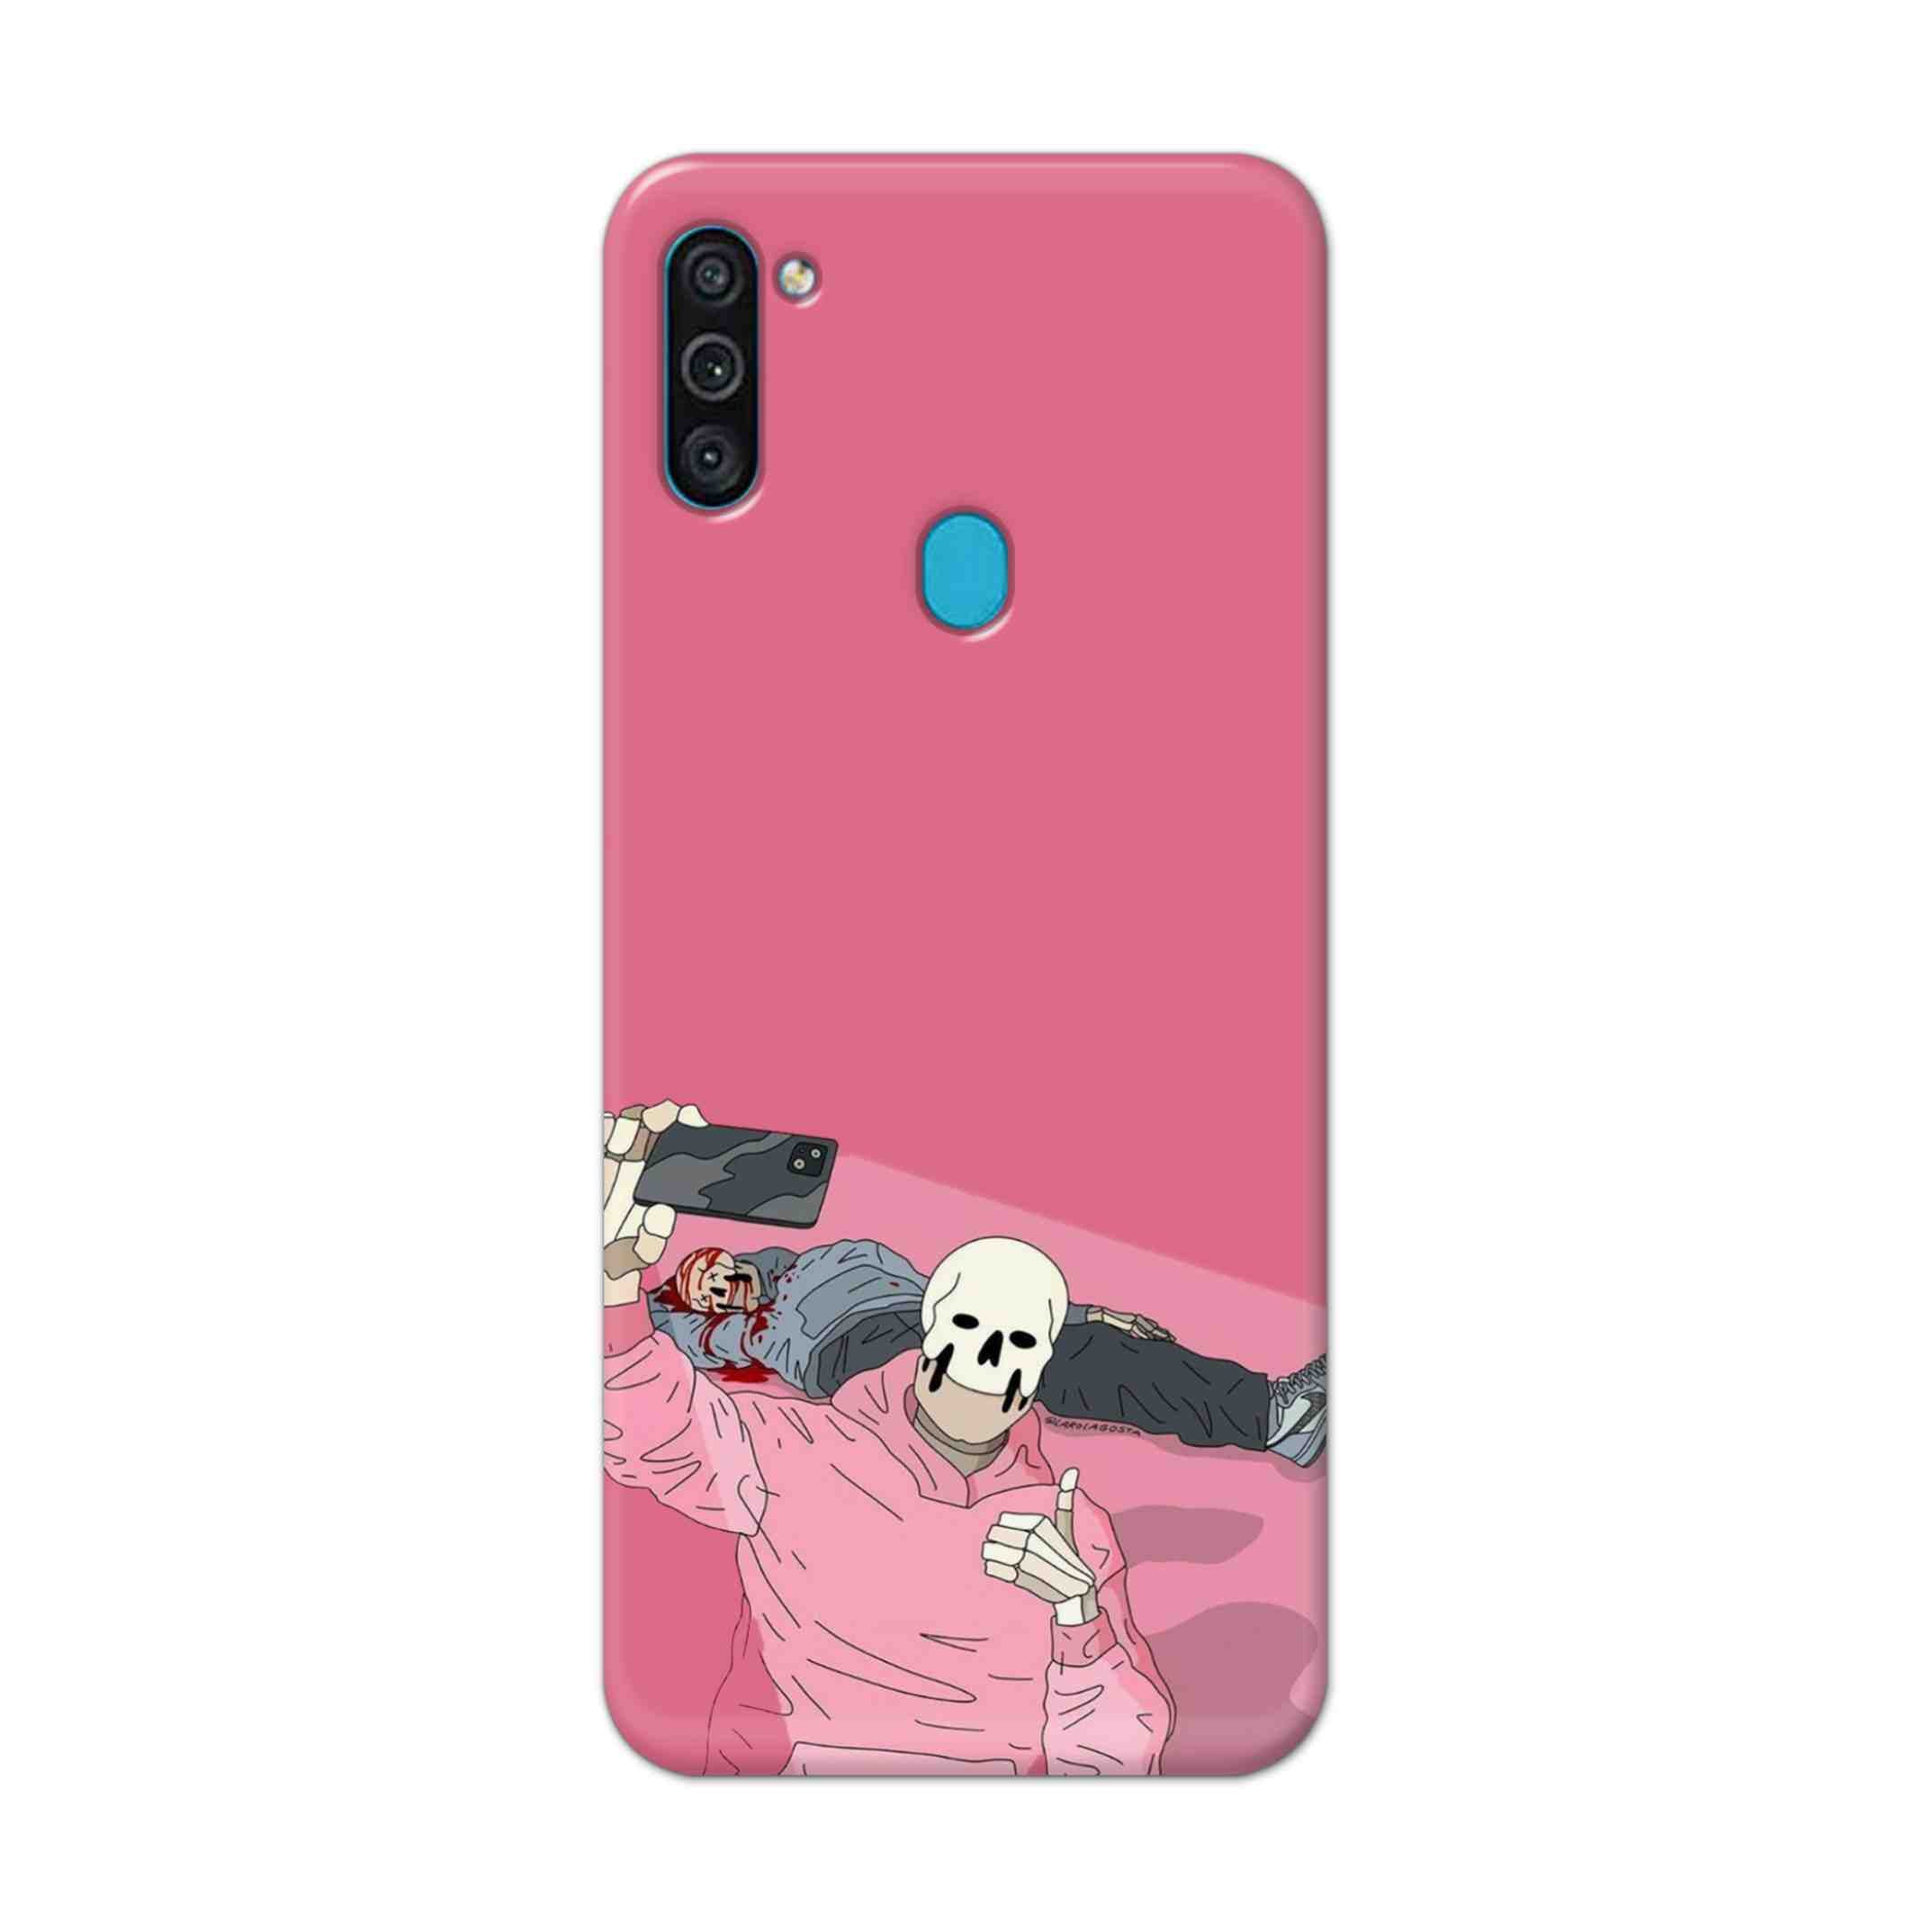 Buy Selfie Hard Back Mobile Phone Case Cover For Samsung Galaxy M11 Online